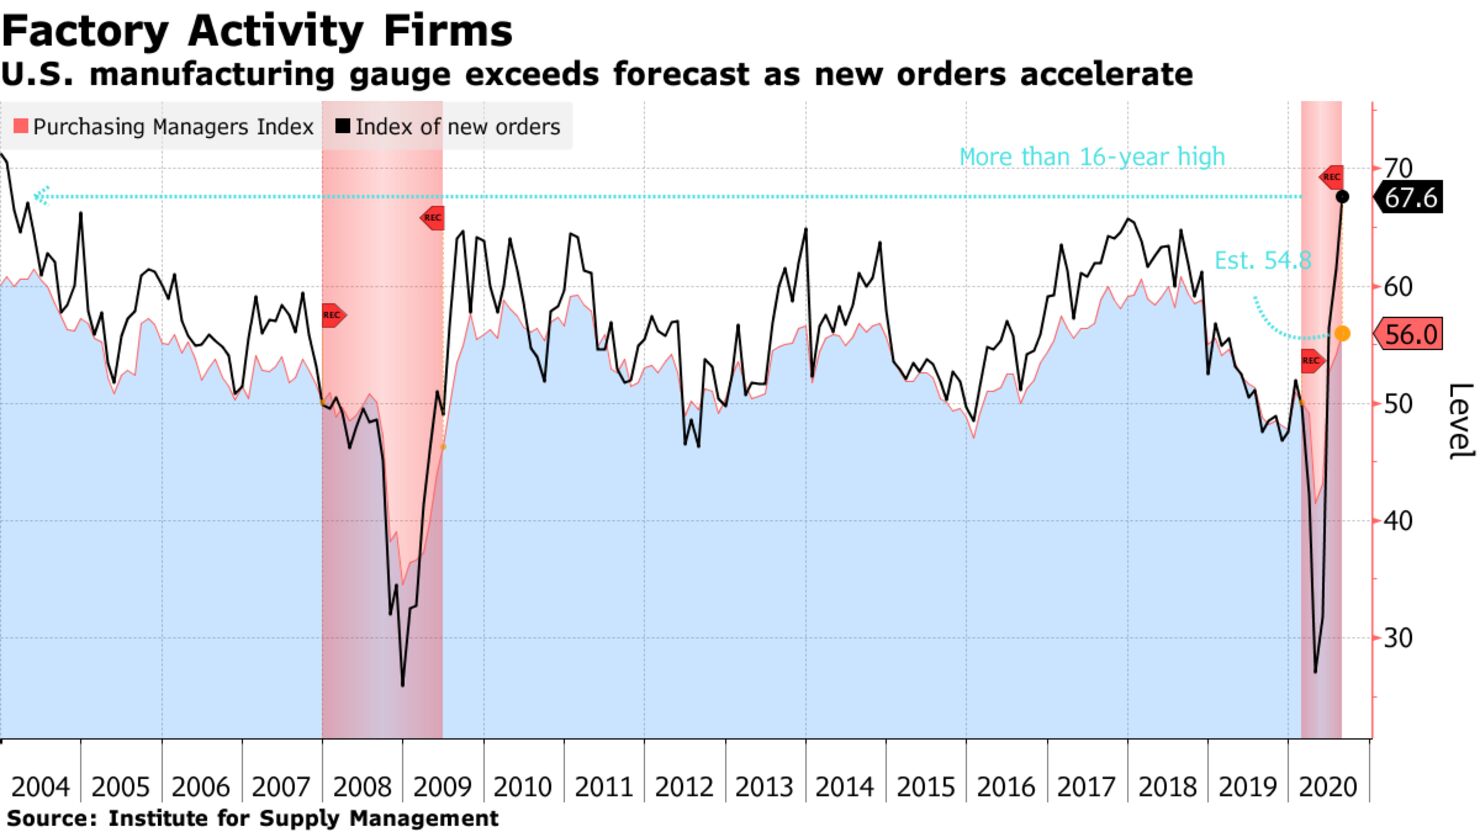 U.S. manufacturing gauge exceeds forecast as new orders accelerate